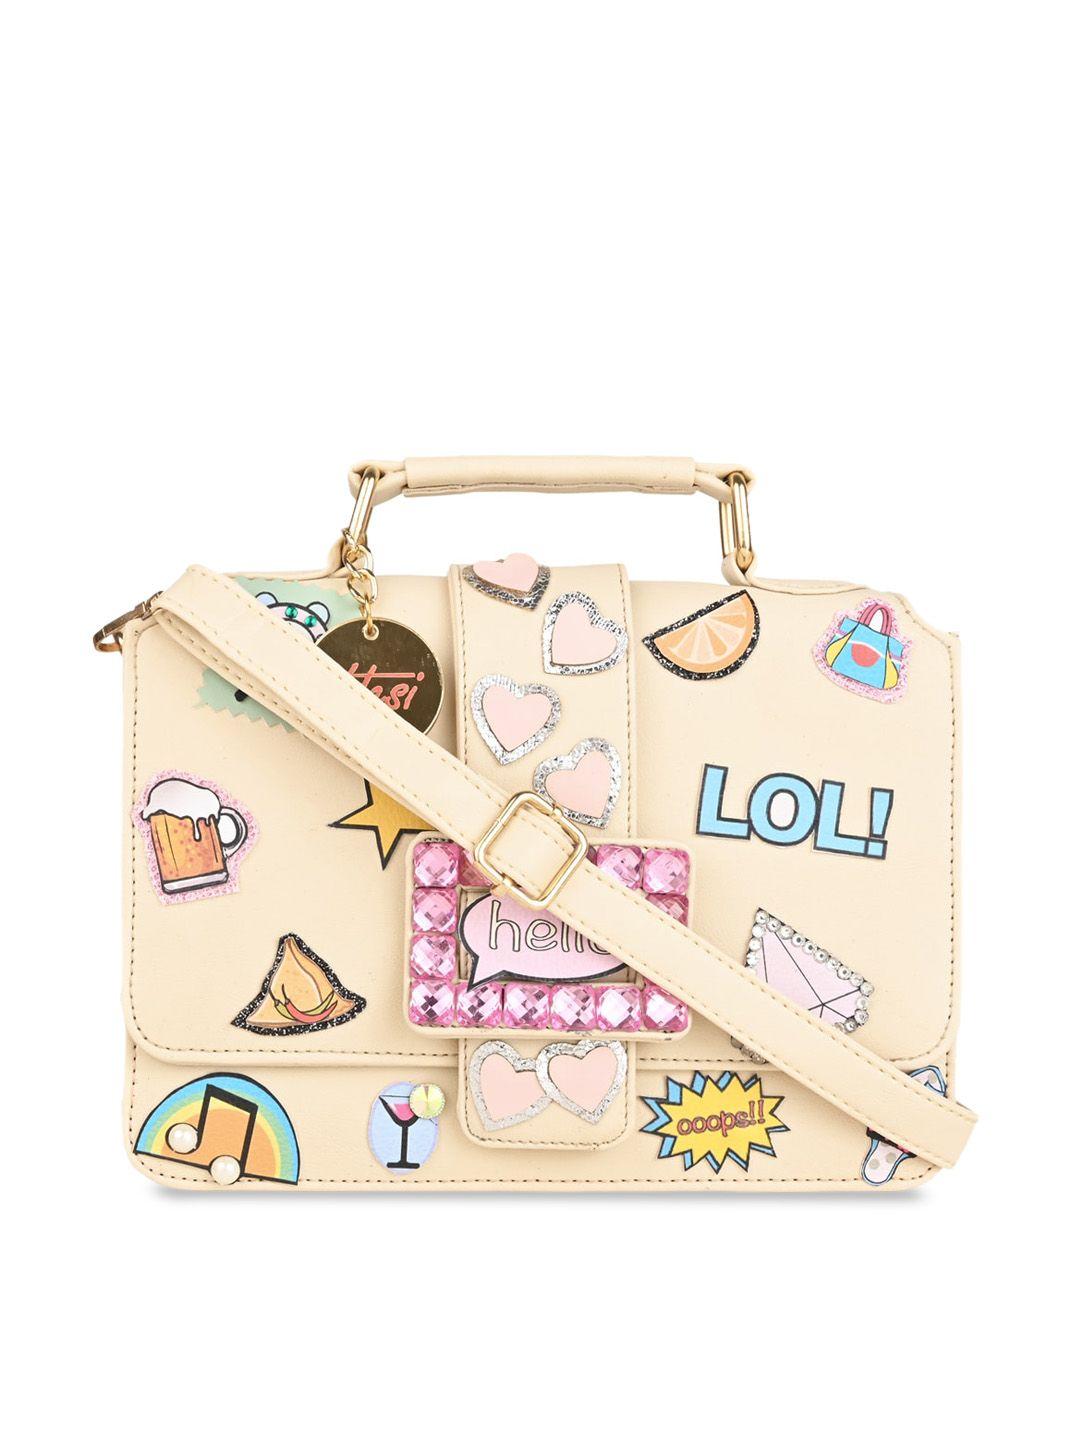 vdesi off white printed structured handheld bag